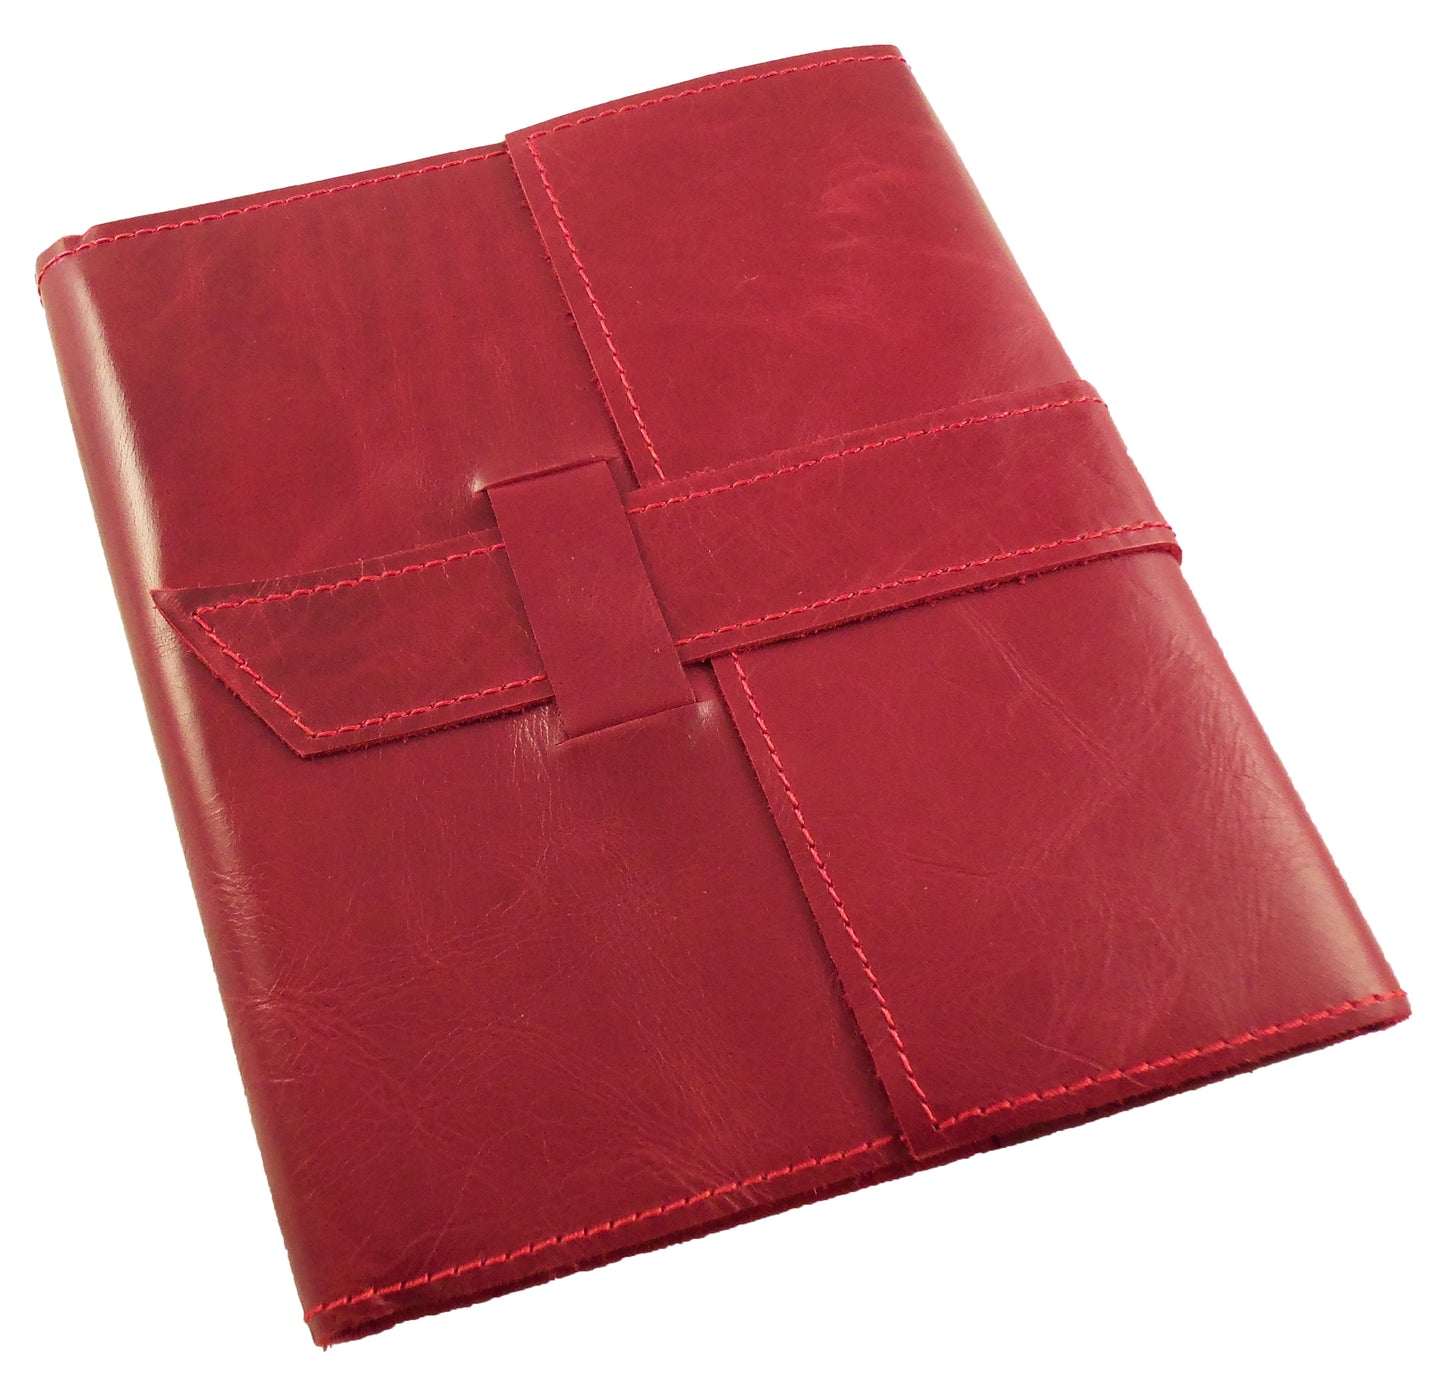 Colorful Leather Refillable Travel Journal Sketchbook with Handmade Paper - 200 pages - 6 x 8" *NEW* - Rustic Ridge Leather